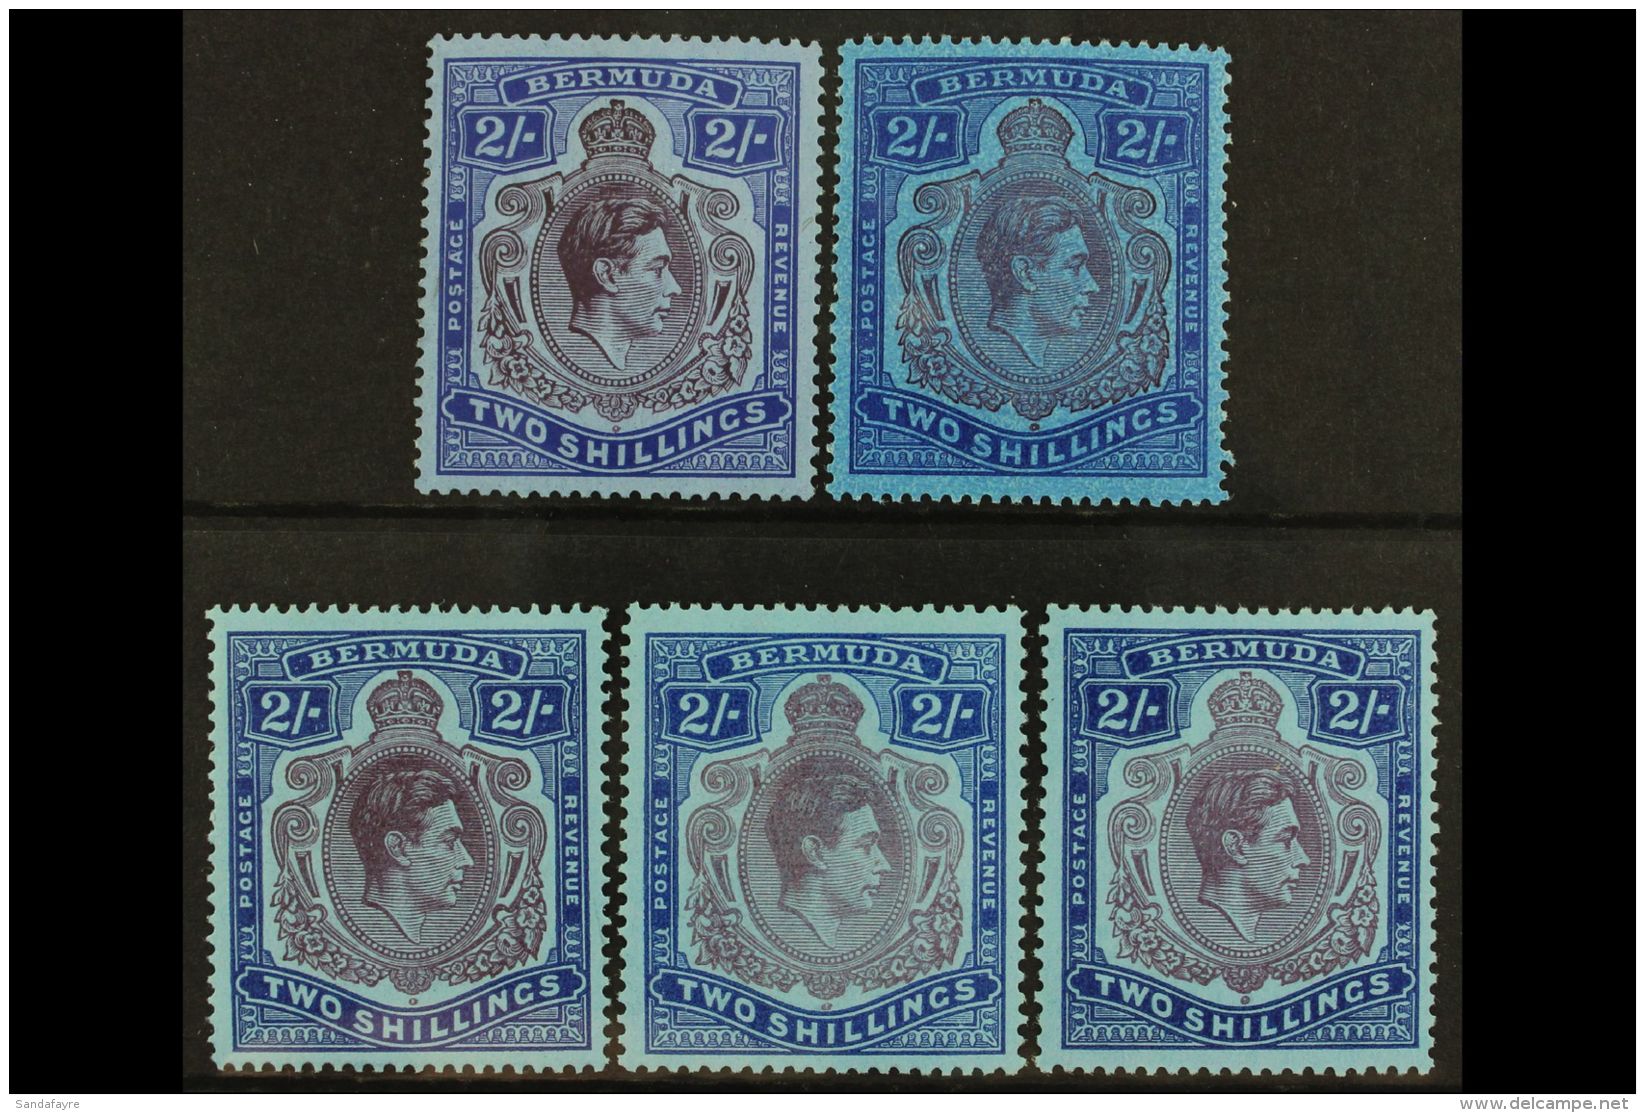 1938-53 ALL DIFFERENT 2s "Key Plate" MINT SELECTION. Includes SG 116, 116c, 116d, 116e &amp; 116f. A Lovely, Very... - Bermuda